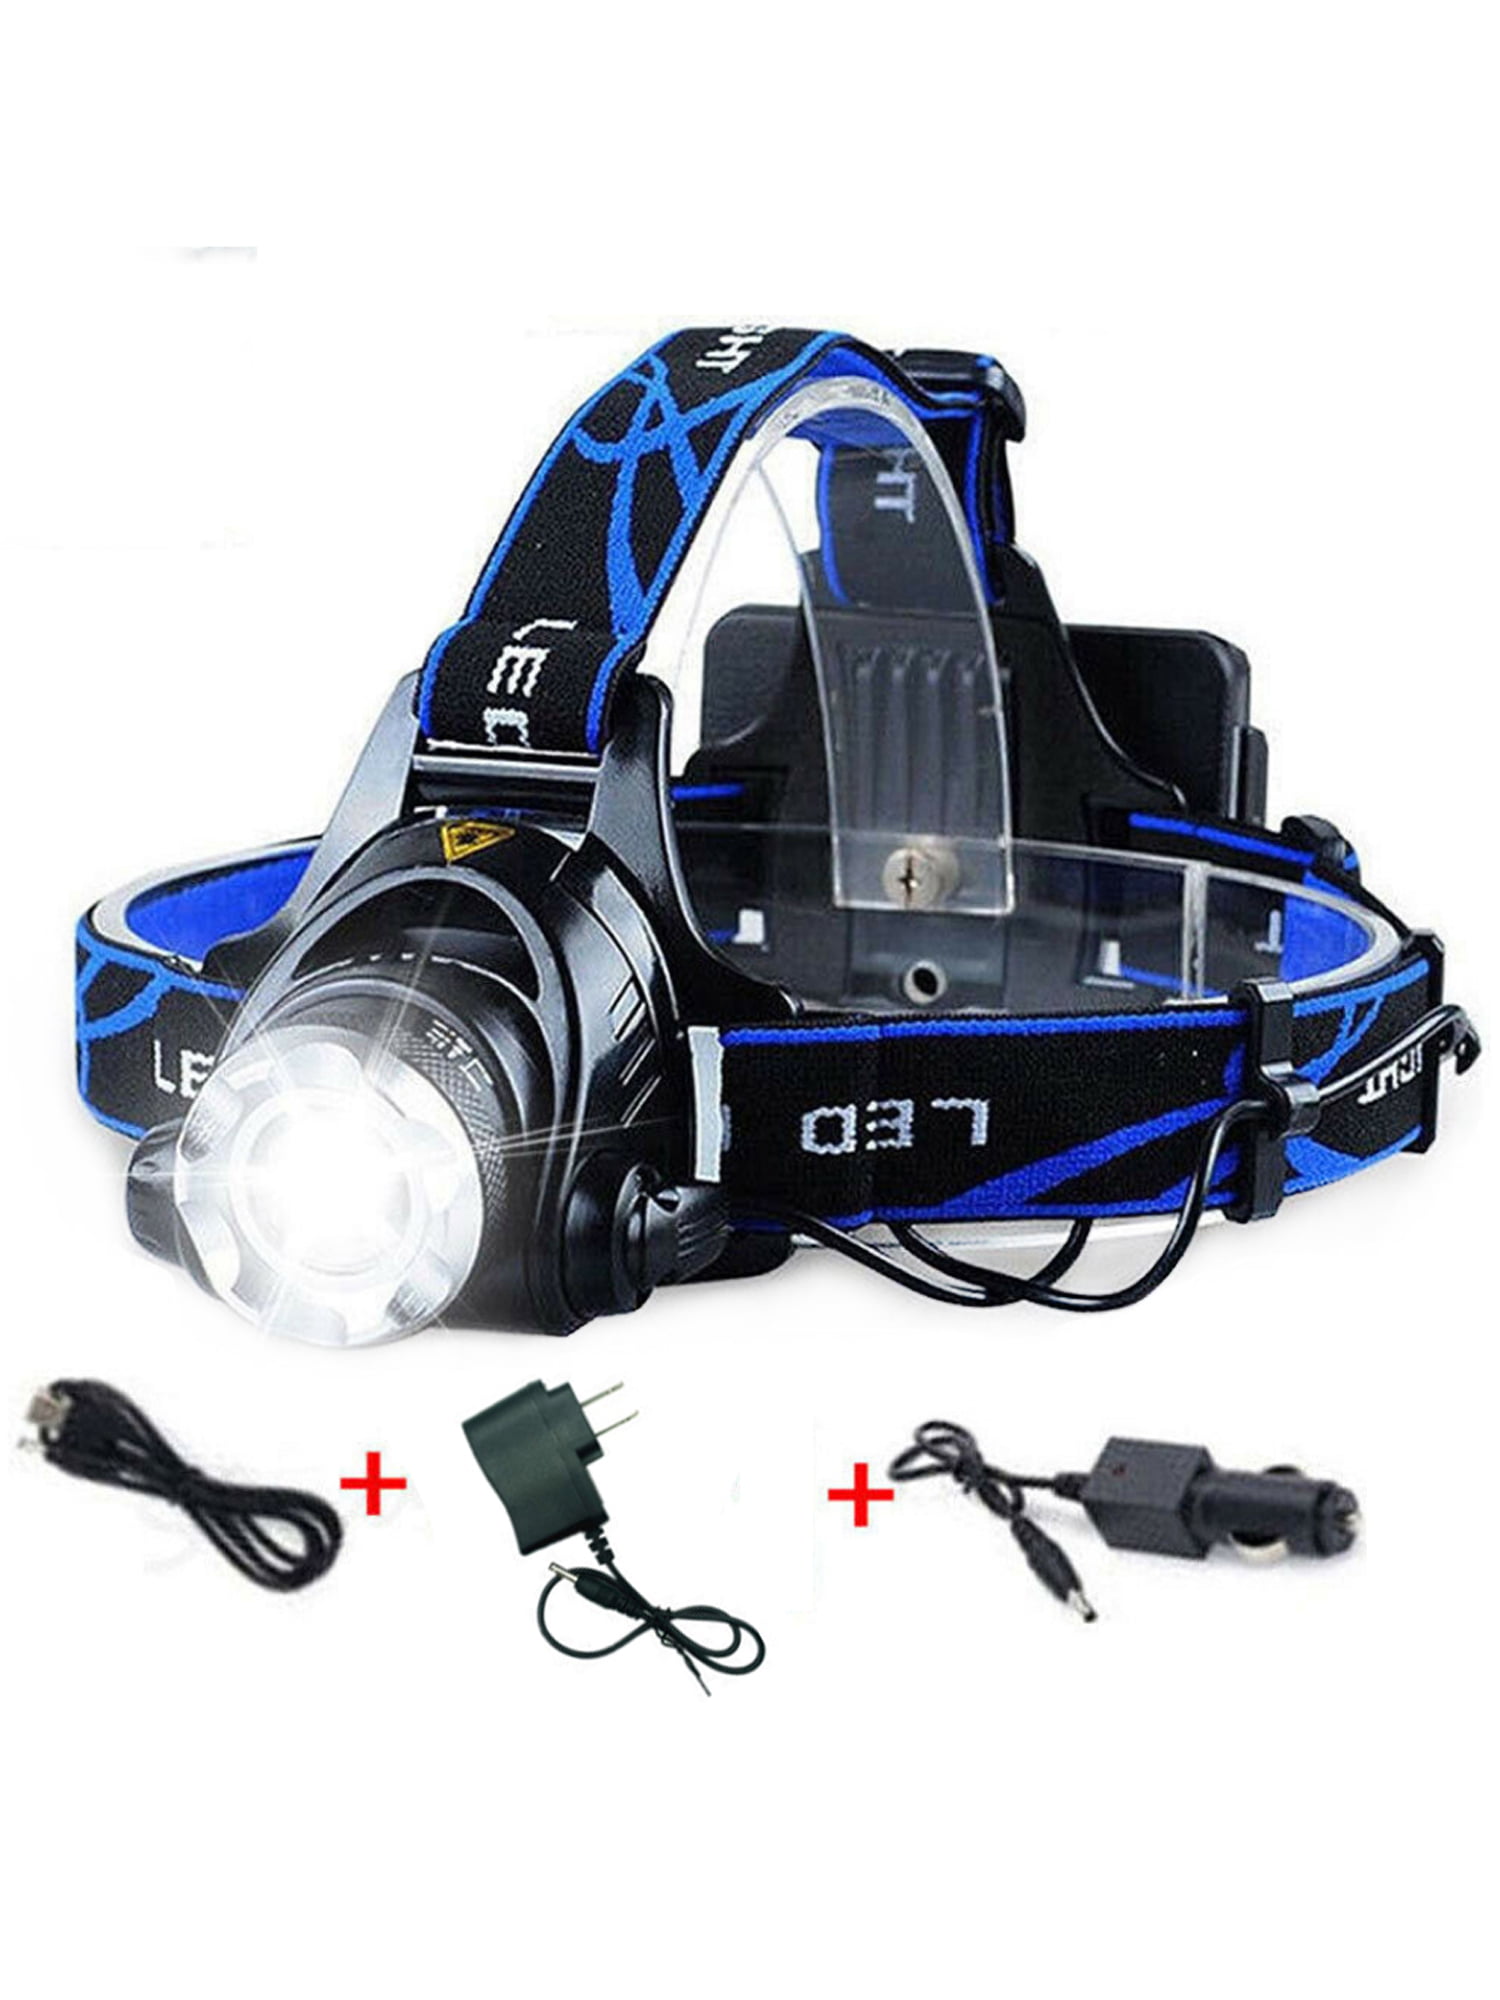 Details about  / 350000LM LED Headlamp Motion Sensor USB Rechargeable Headlight Built in Battery